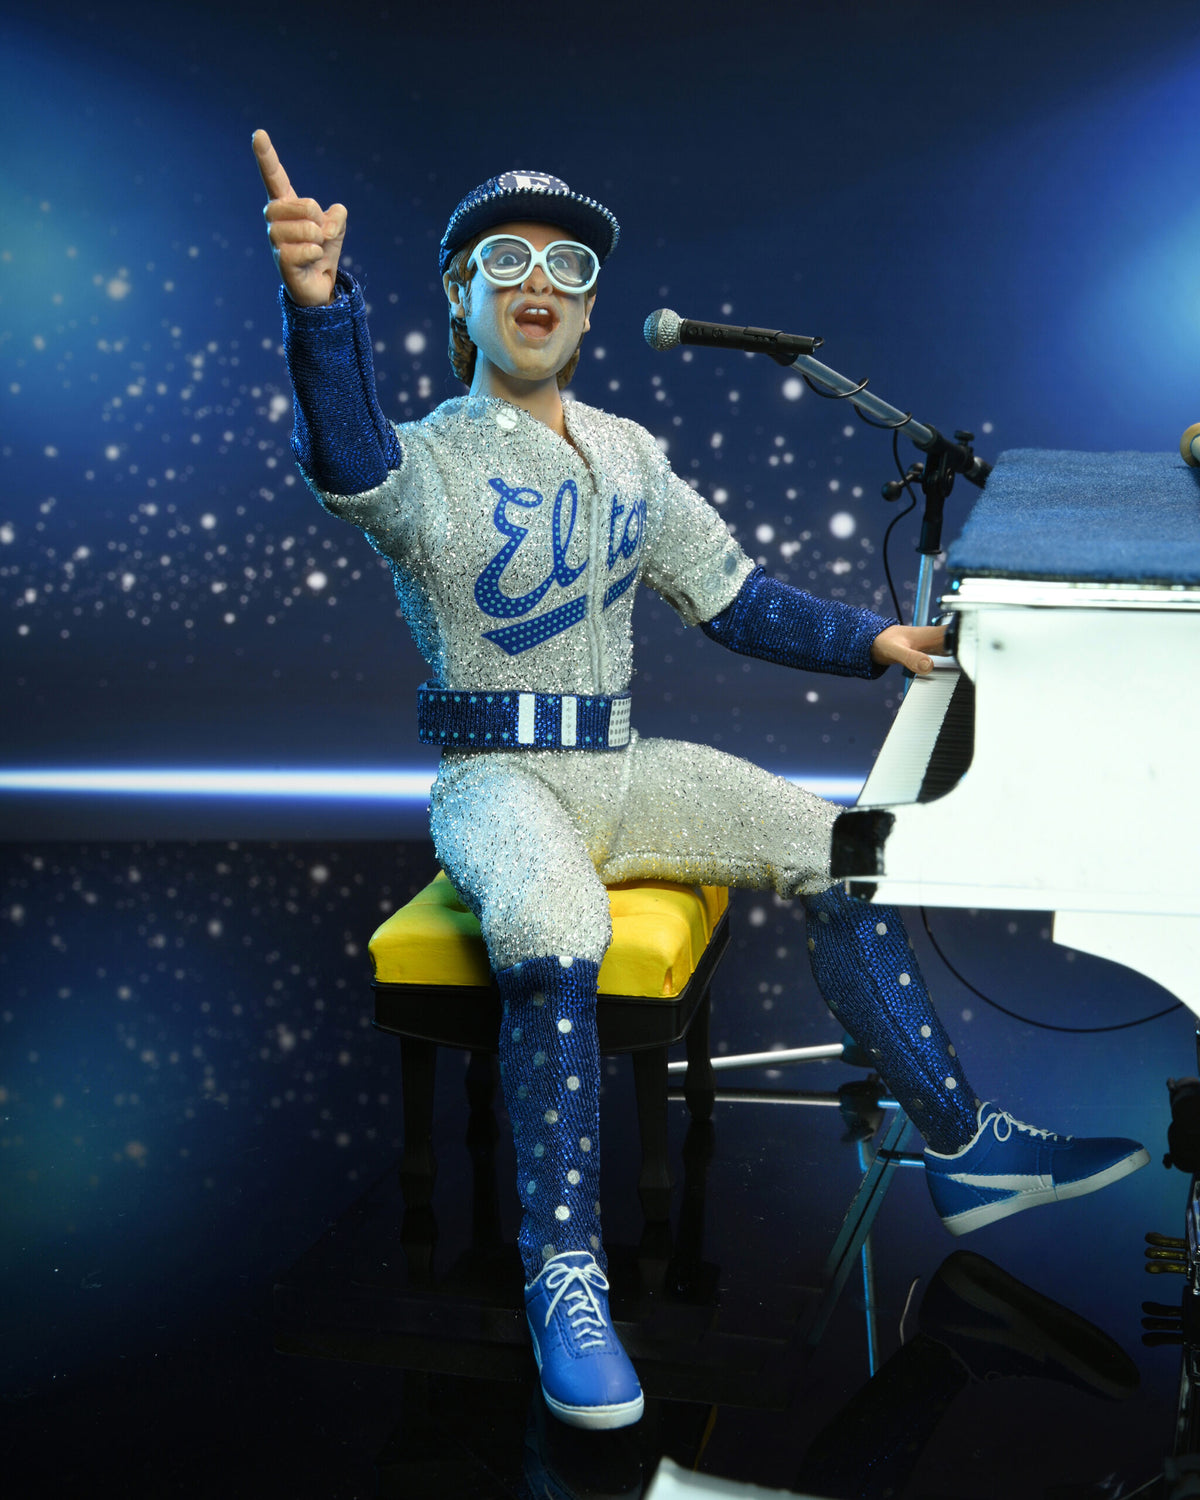 NECA - Elton John (Live in '75) 8" Clothed Action Figure